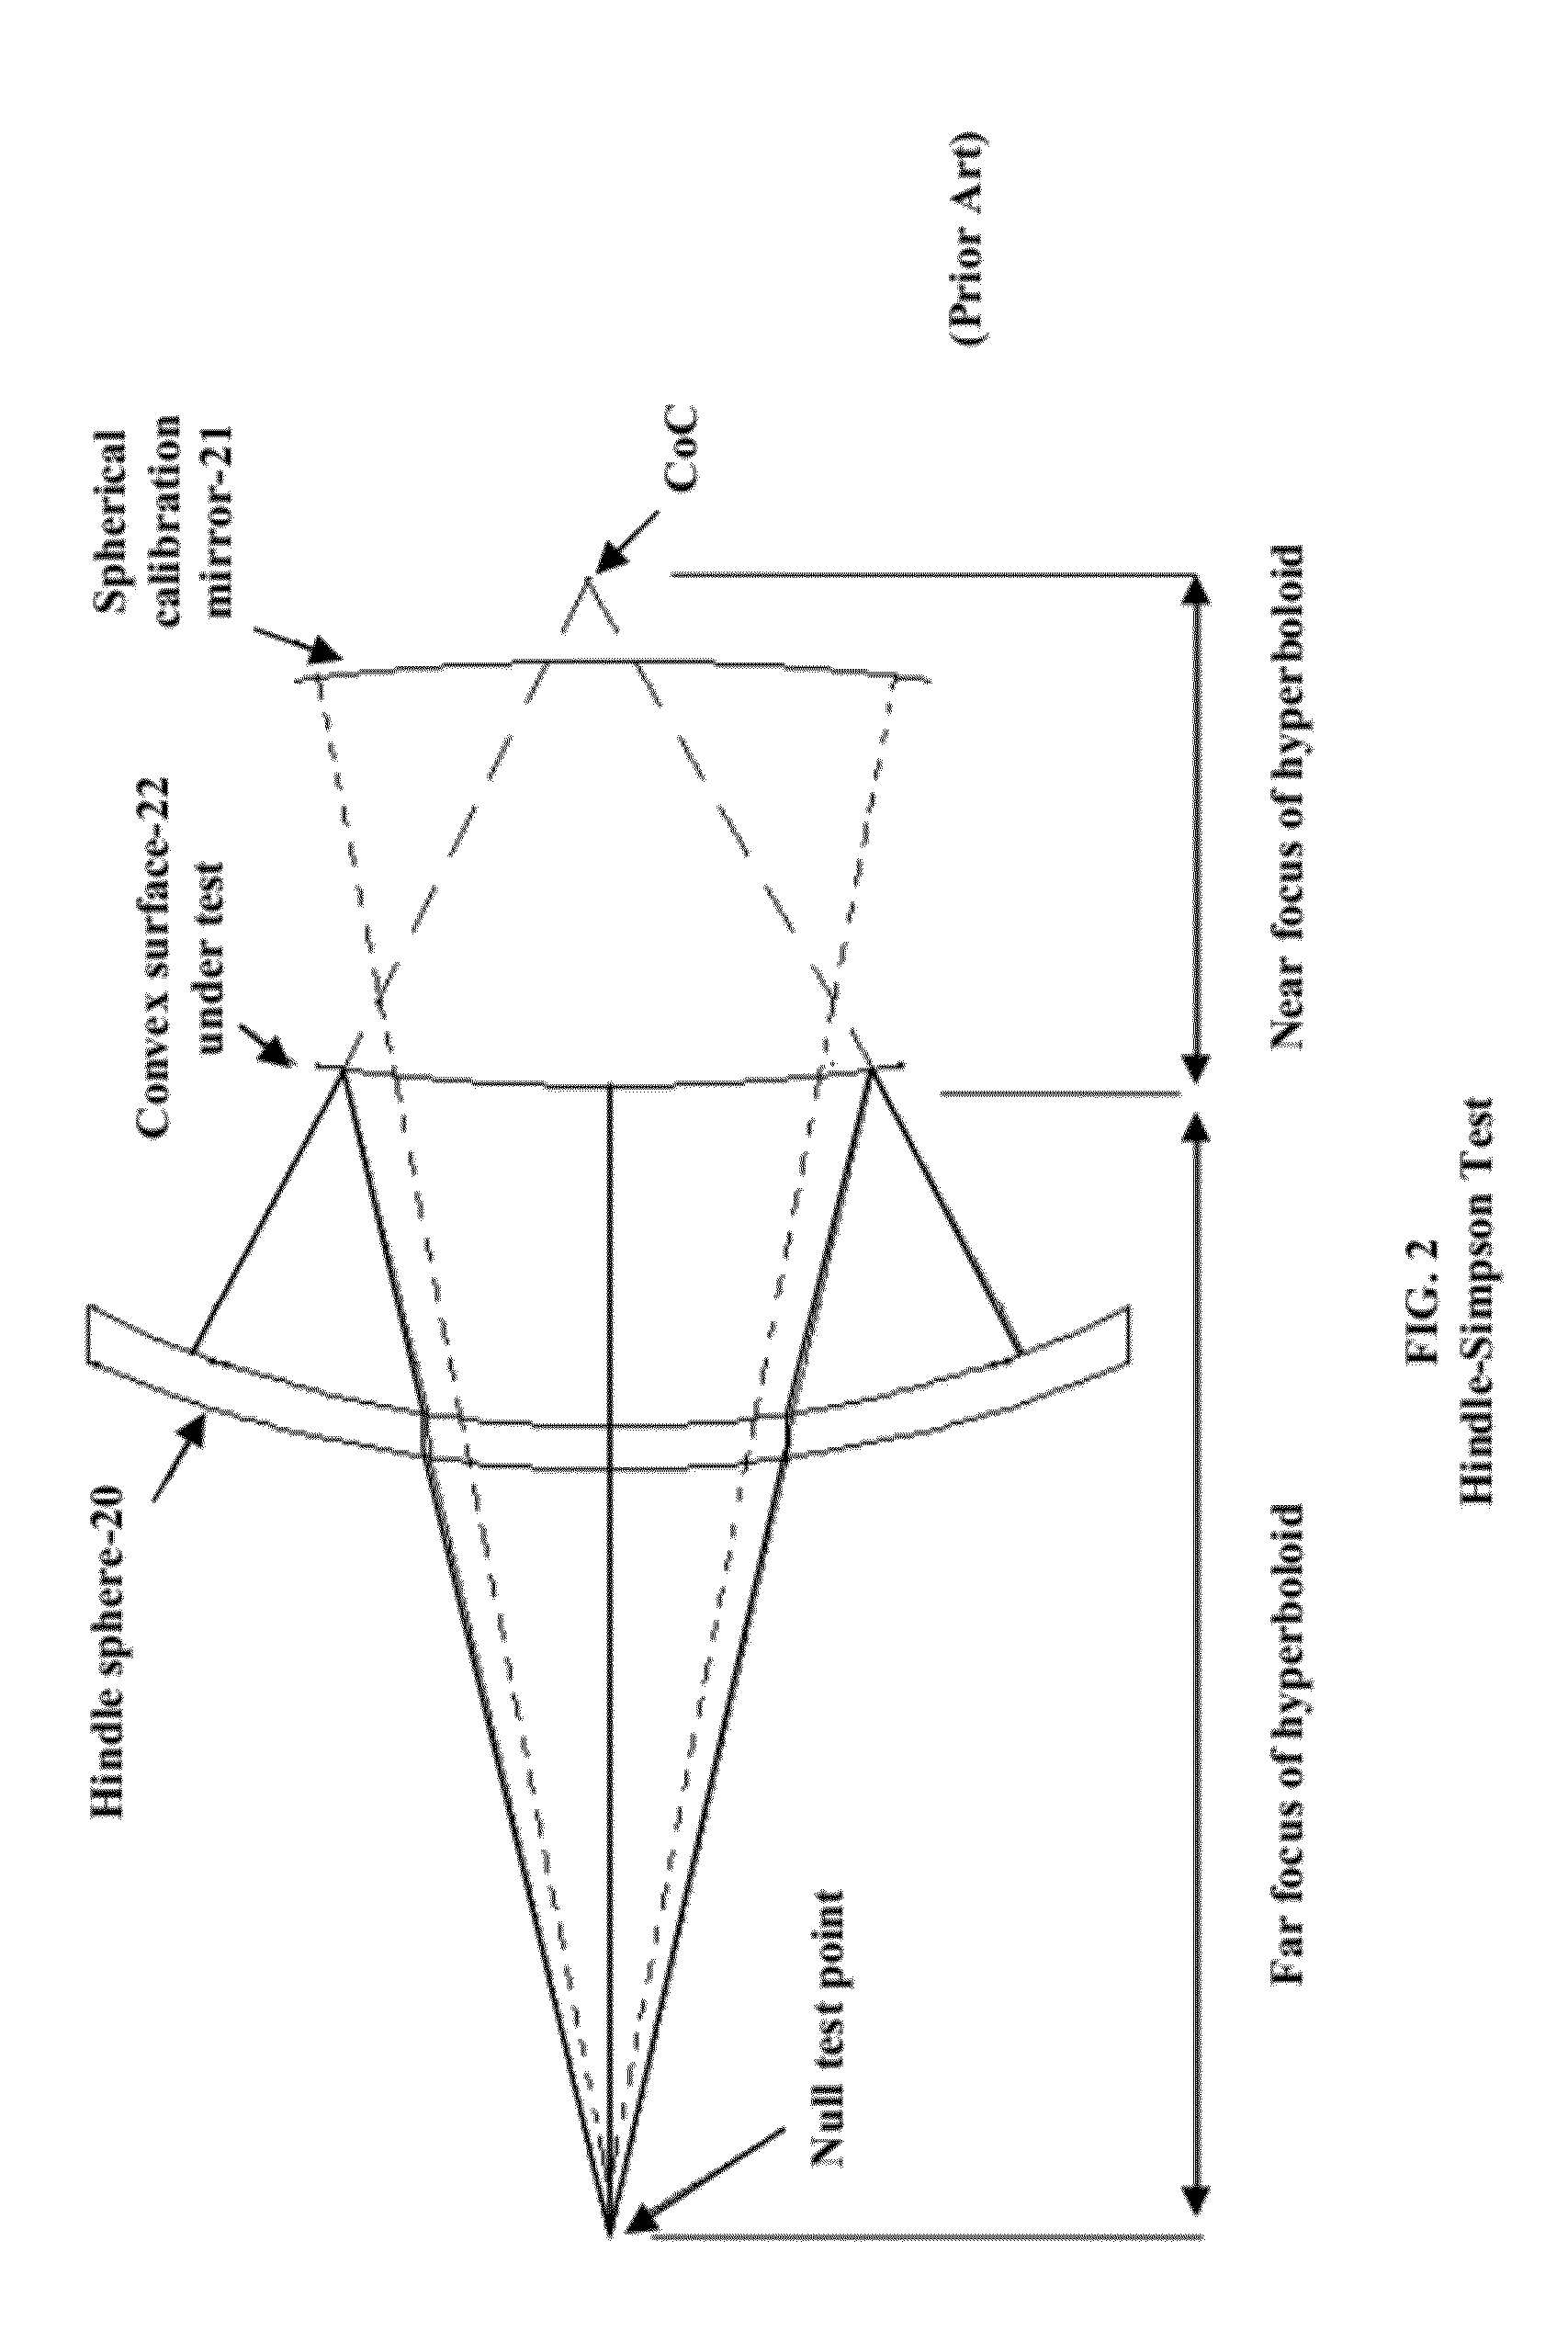 Surface figure test method for large convex optical surfaces